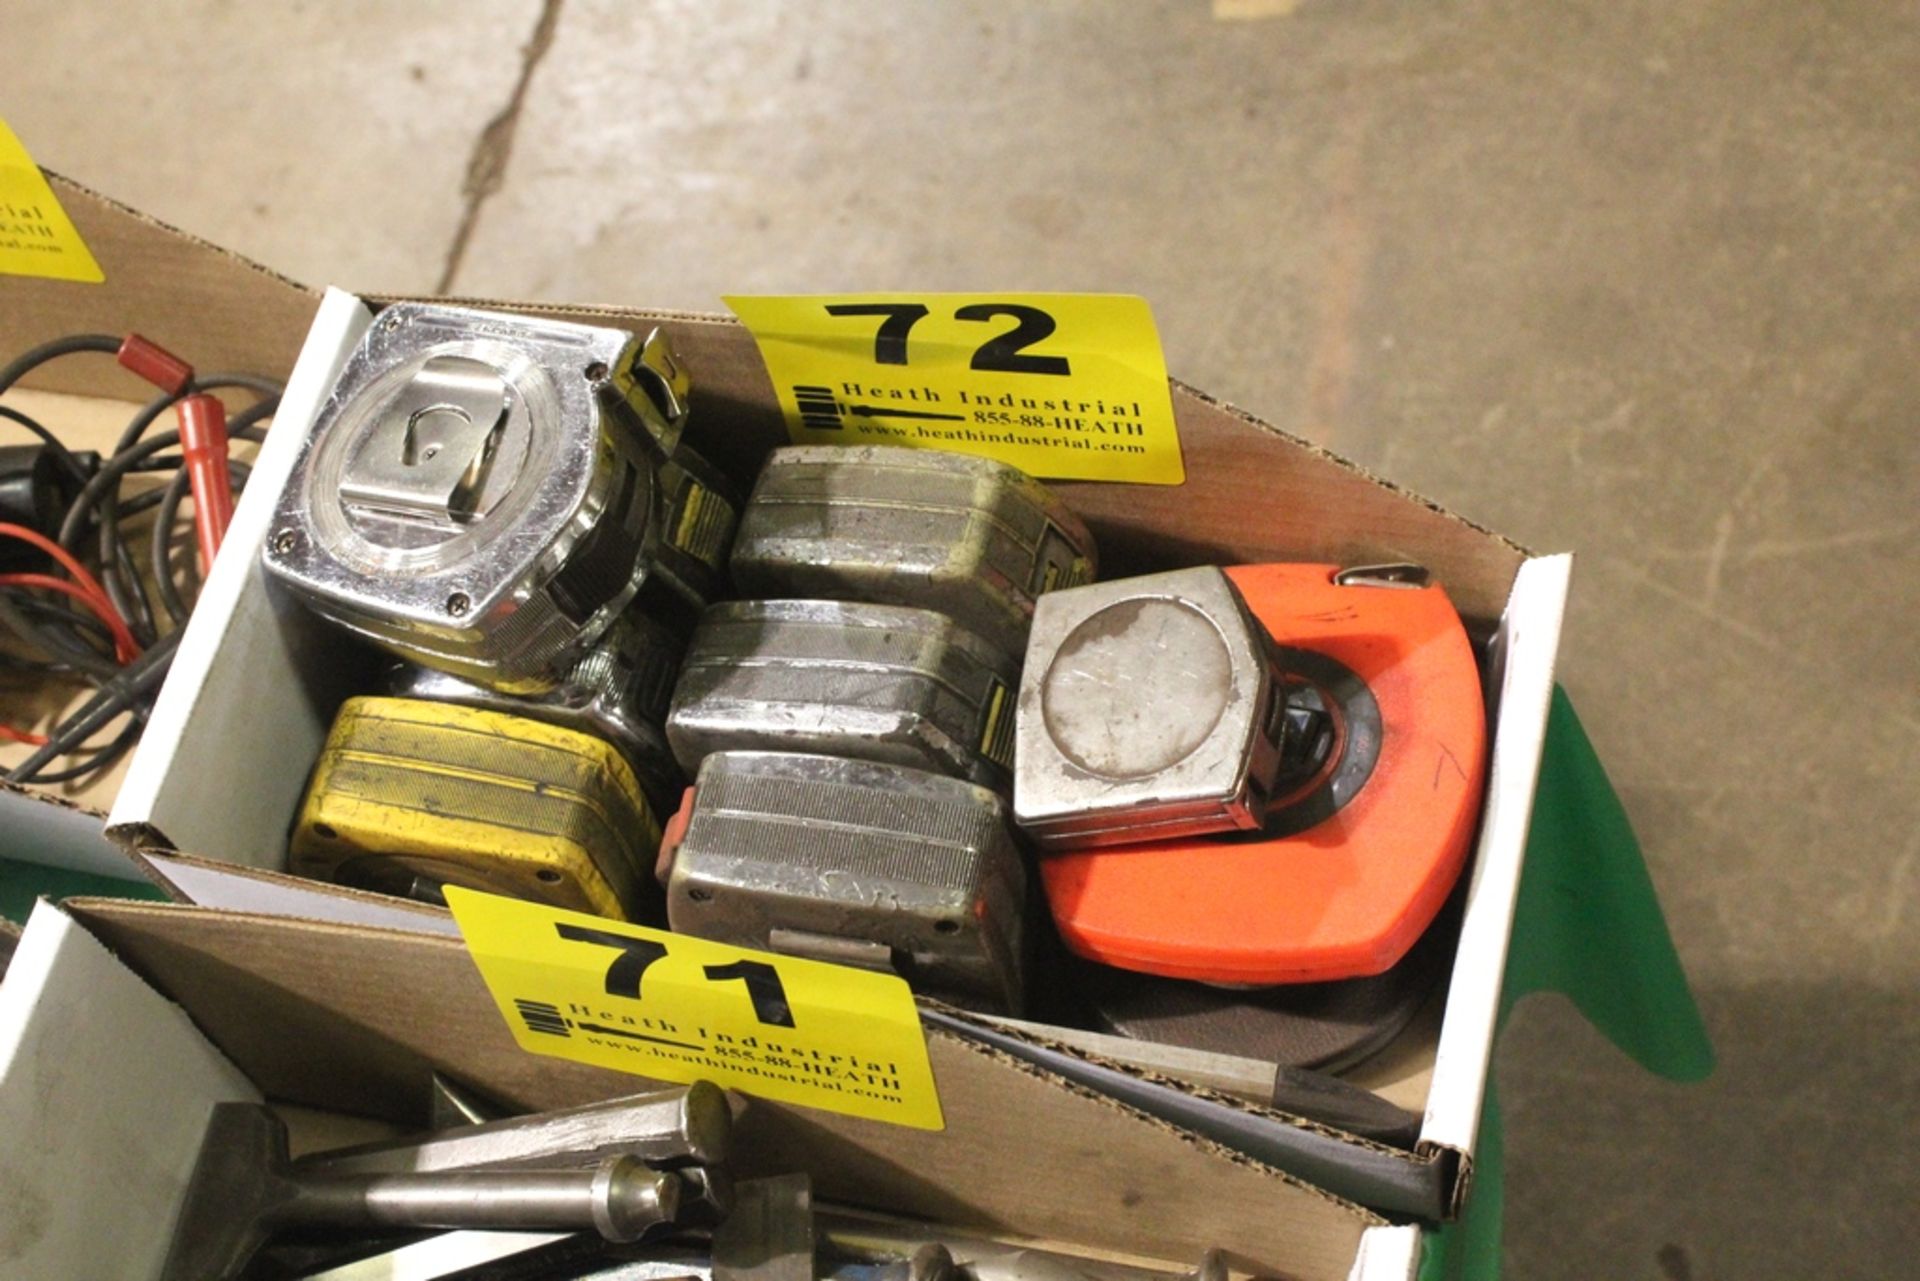 ASSORTED TAPE MEASURES, CHAULK LINES, AND LEVELS